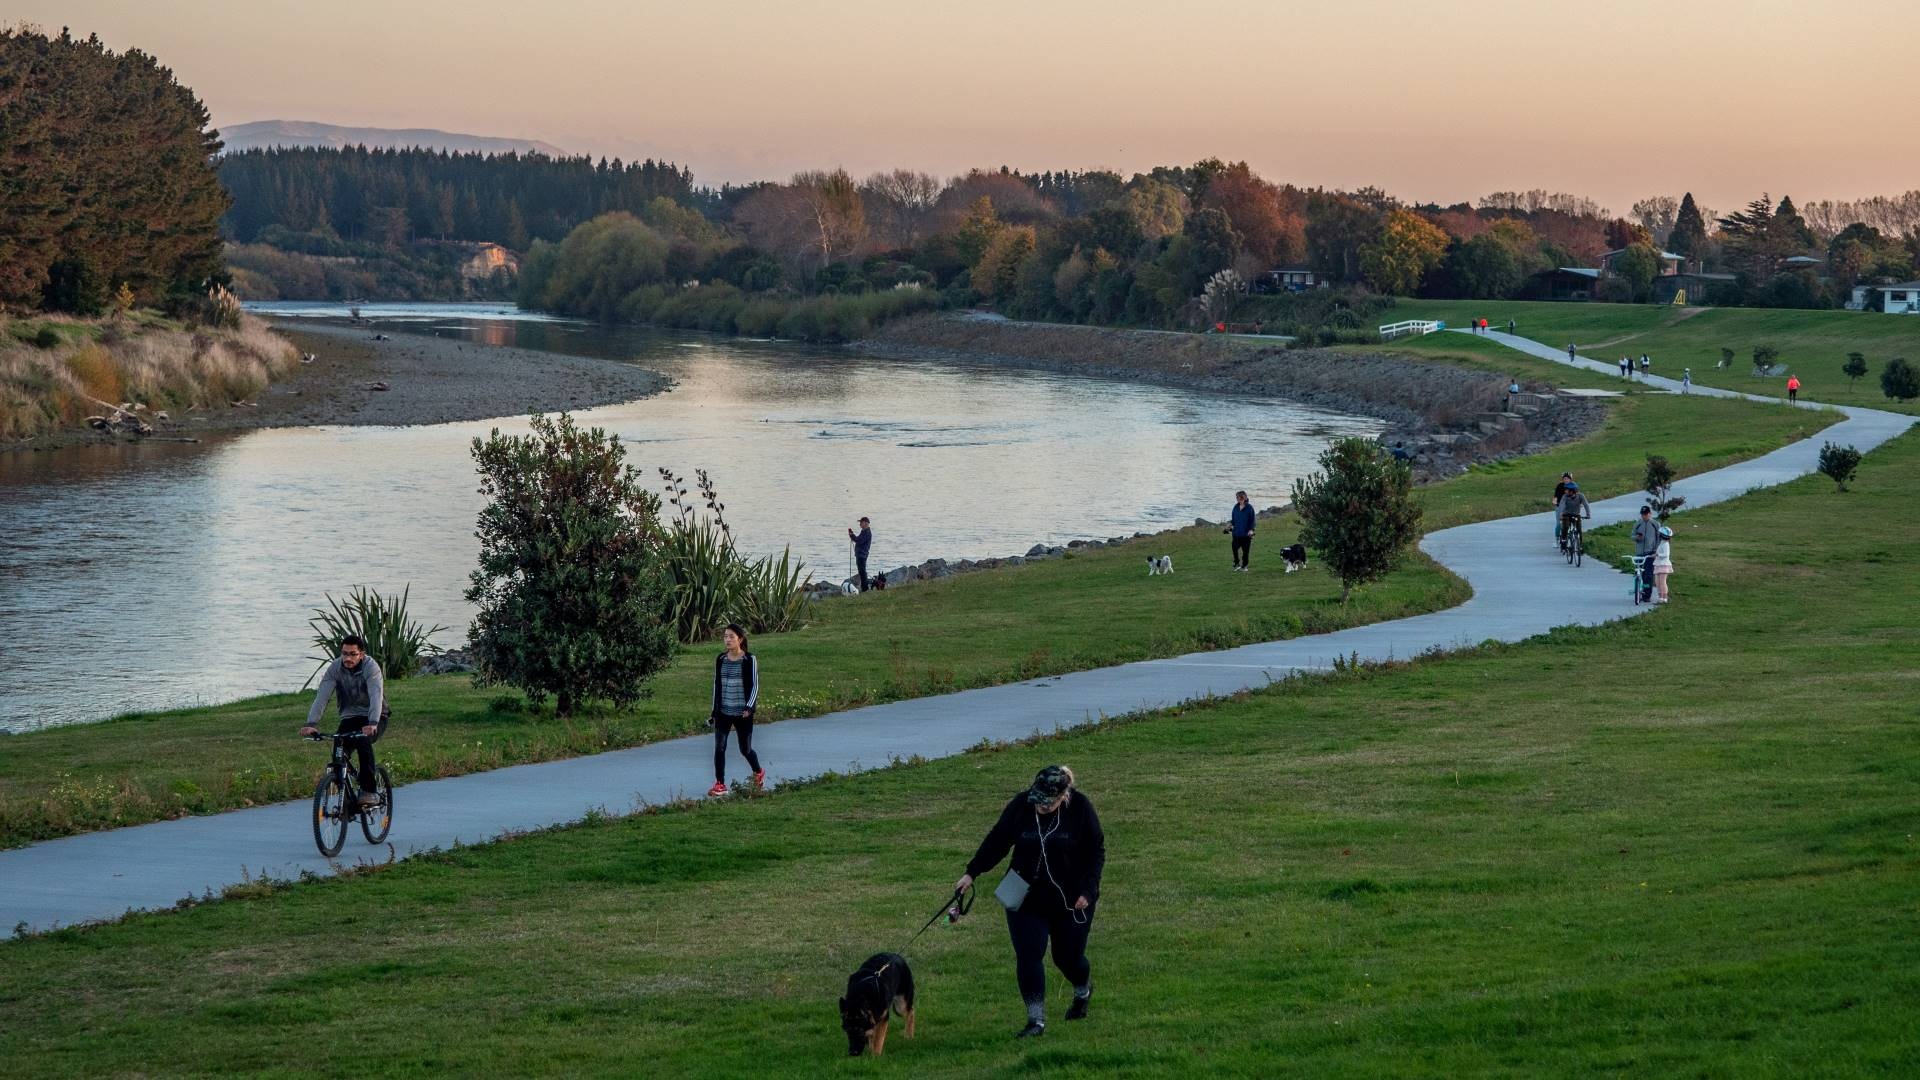 A busy walkway alongside the riverbank with lots of people biking, walking, and exercising dogs.